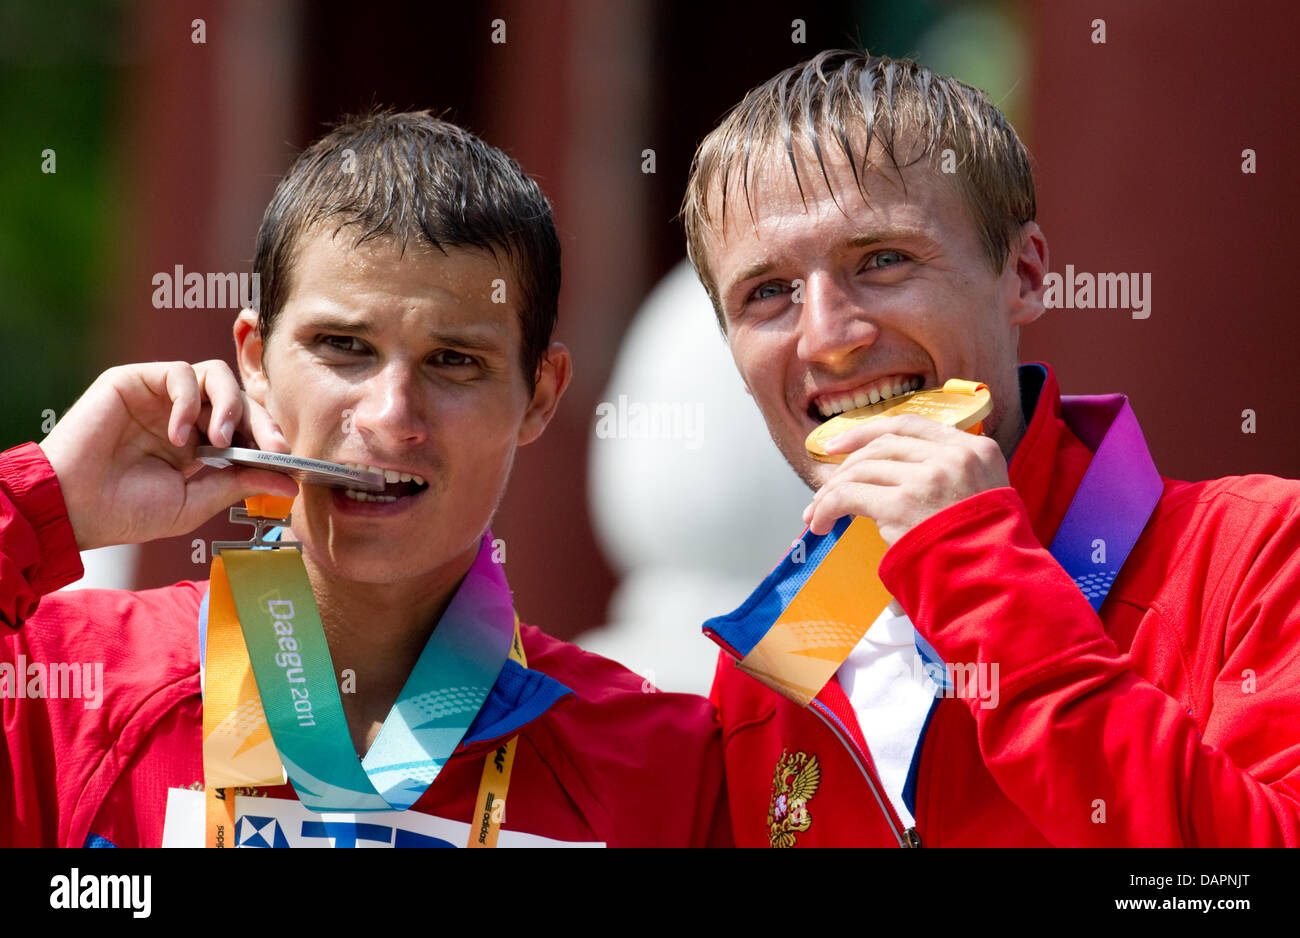 Winner Valeriy Borchin (R) of Russia and his compatriot Vladimir Kanaykin show their medals for finishing first and second place in the Men's 20 Kilometres Race Walk of the 13th IAAF World Championships in Daegu, Republic of Korea, 28 August 2011. Kanaykin ranked second. Photo: Bernd Thissen dpa Stock Photo